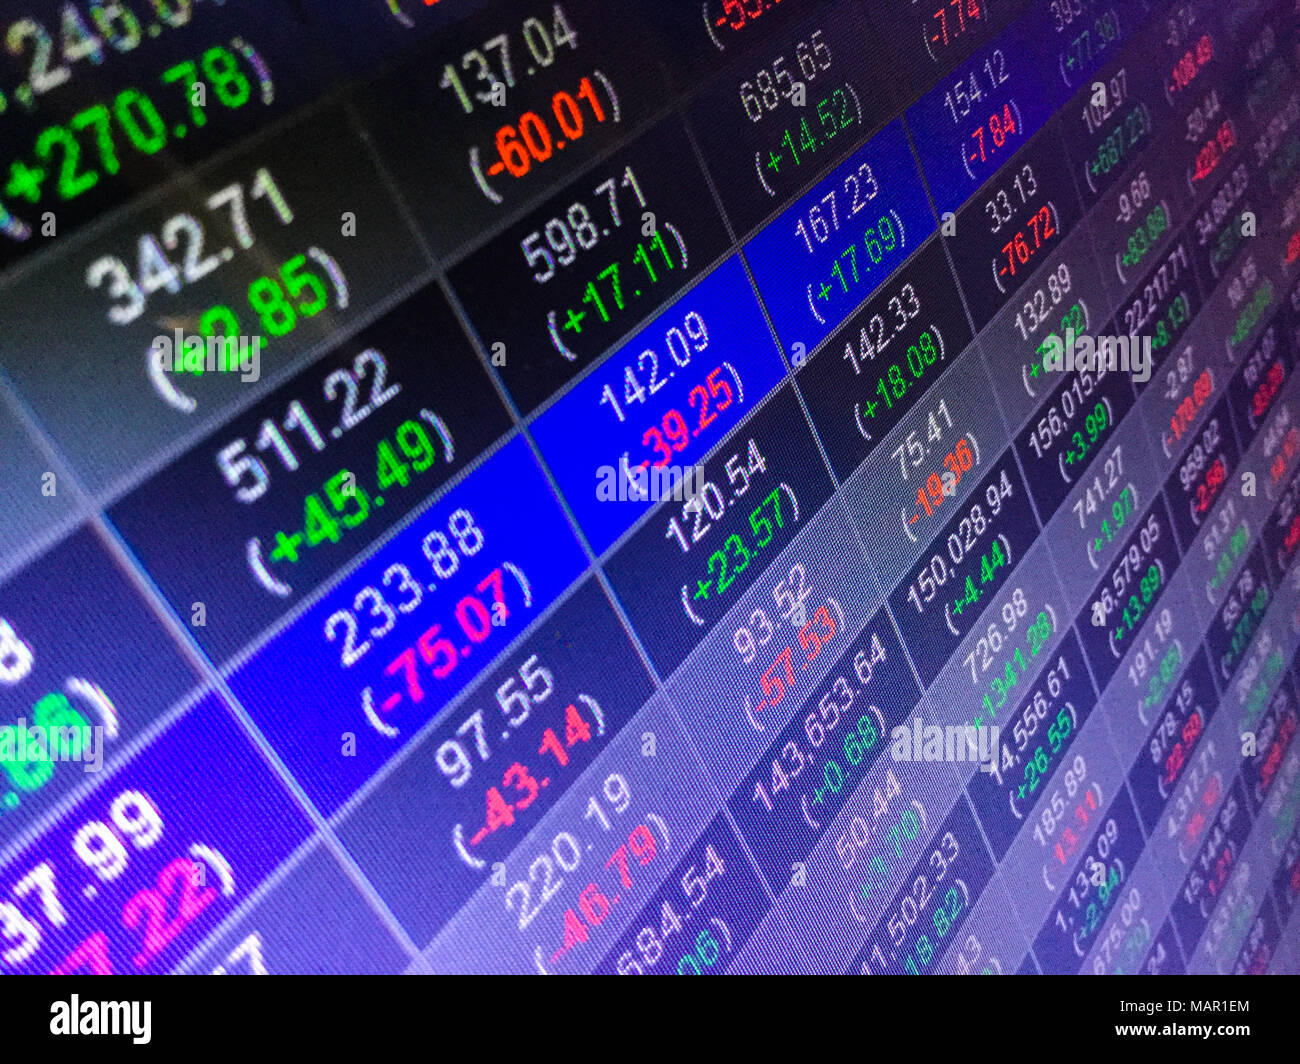 Stock market display board concept background Stock Photo